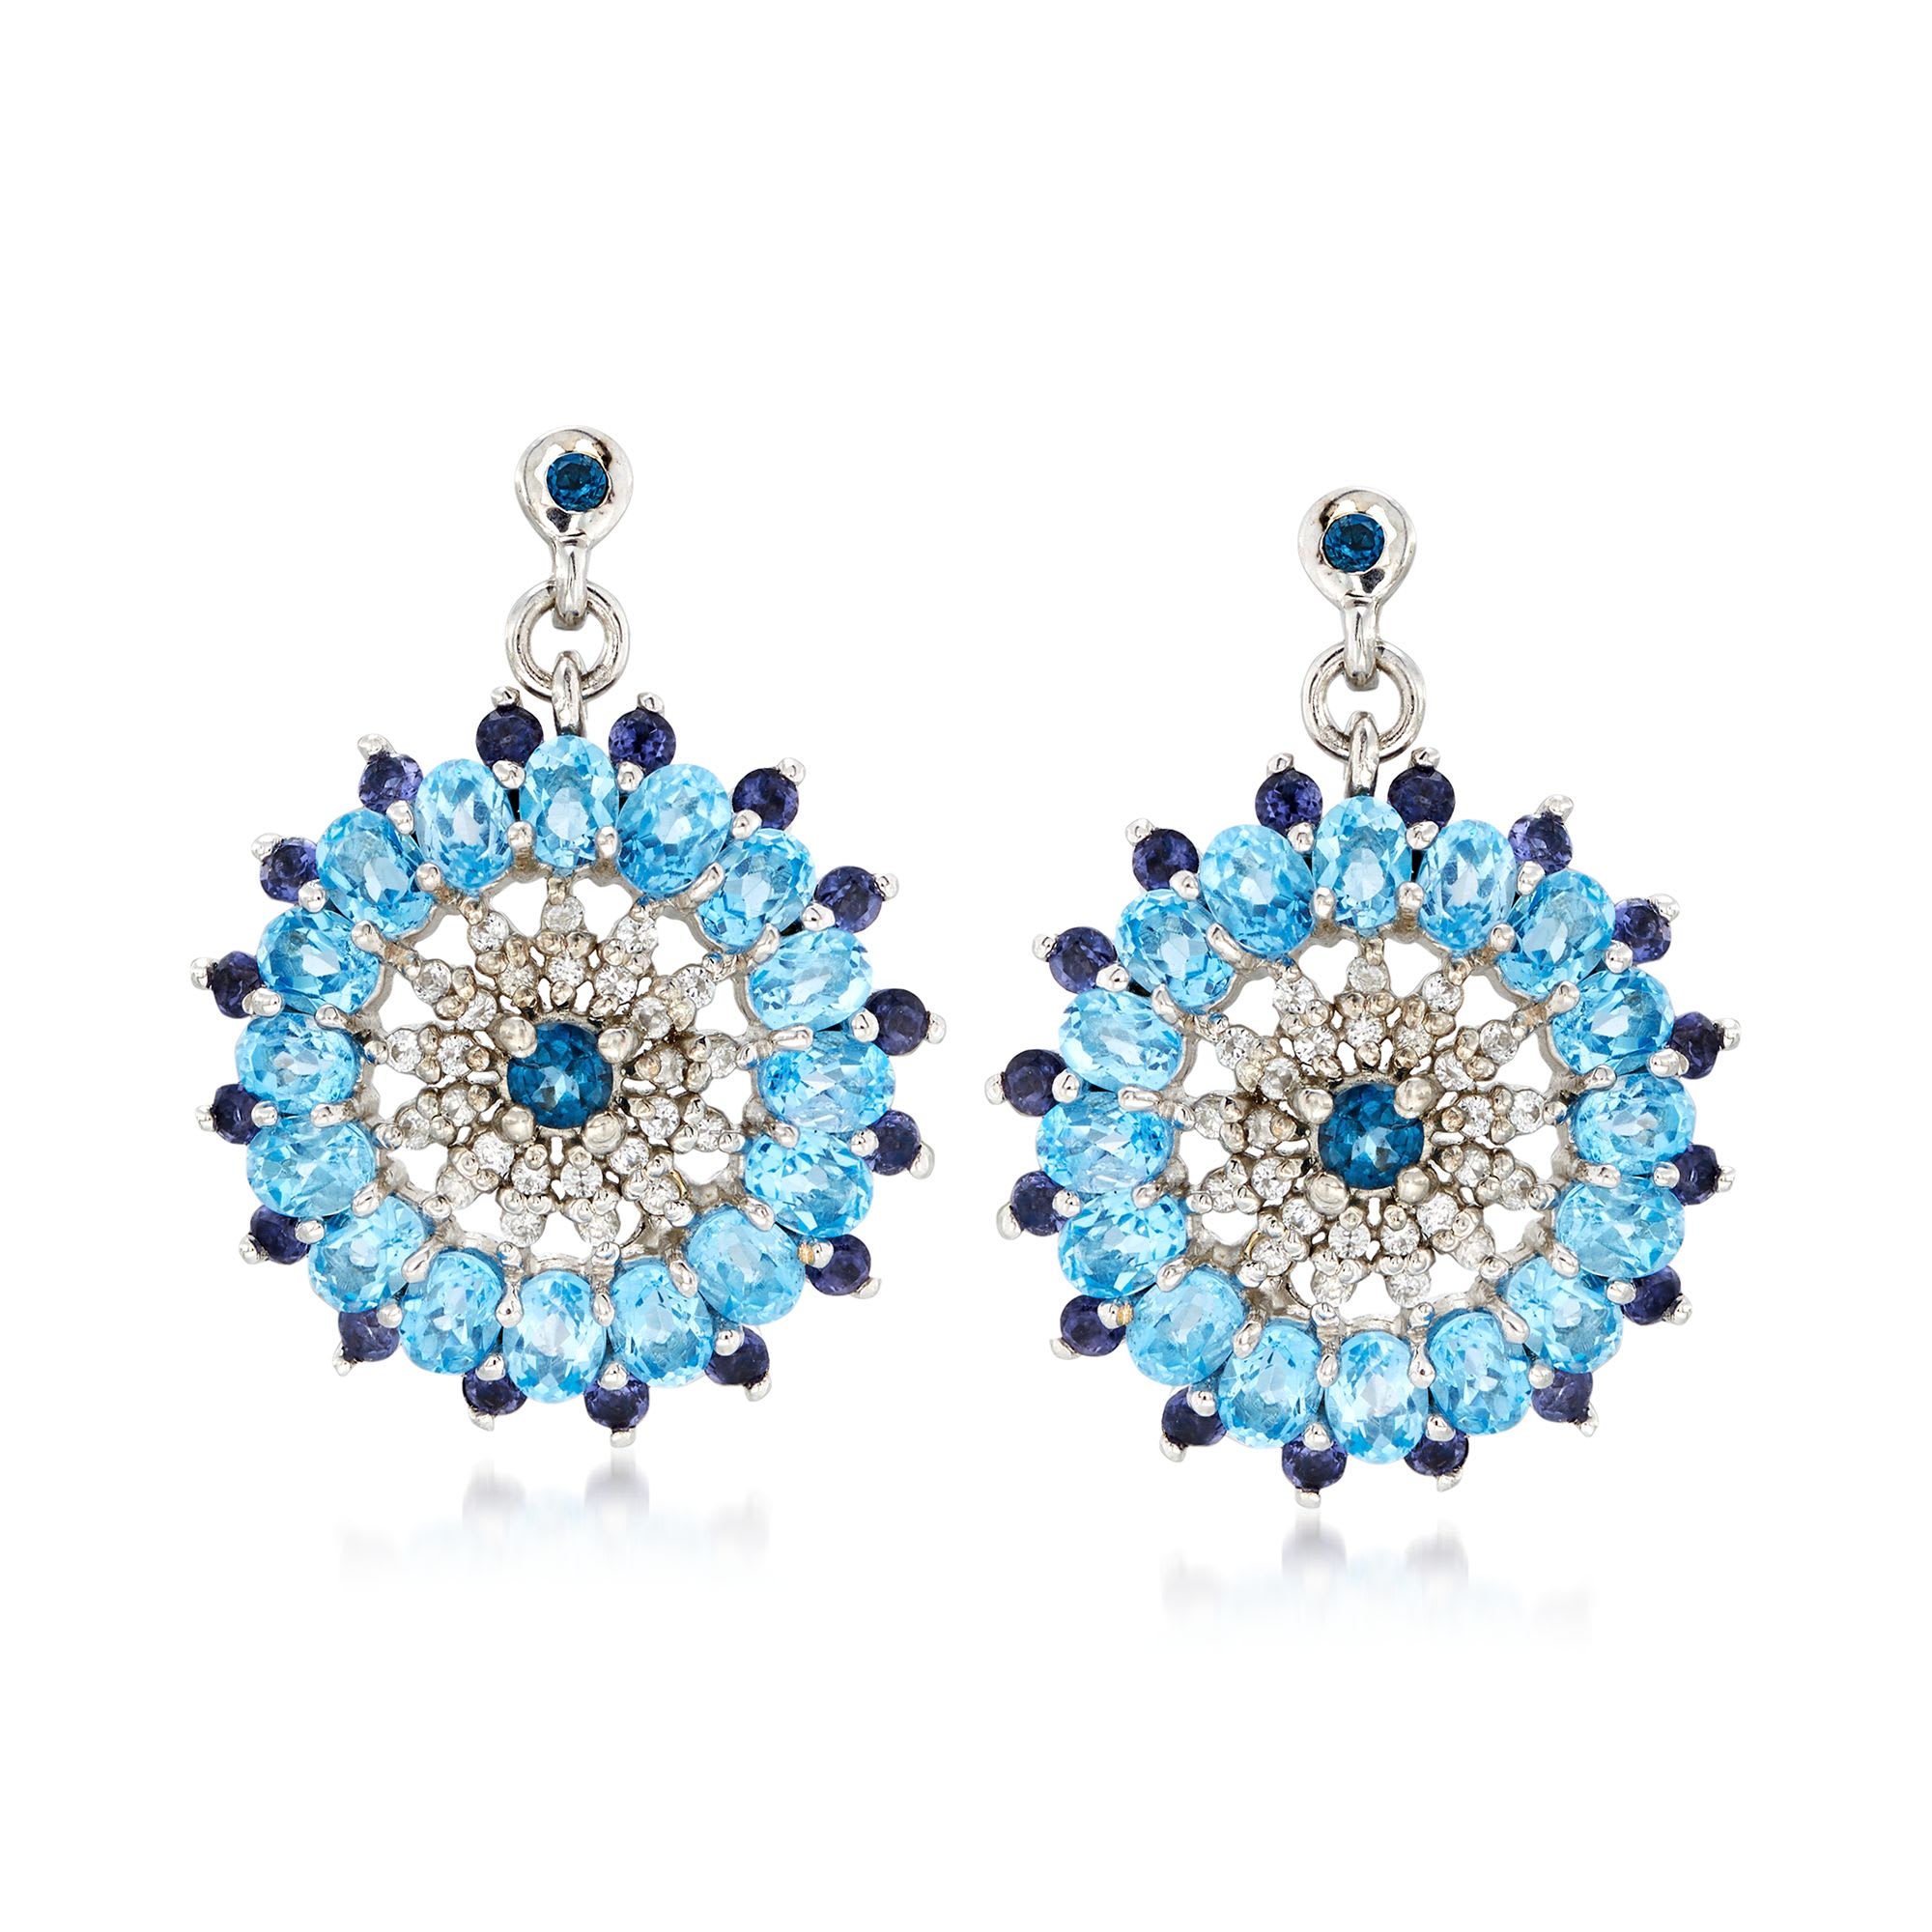 6.95 ct. t.w. Blue Topaz and .90 ct. t.w. Iolite Circle Drop Earrings ...